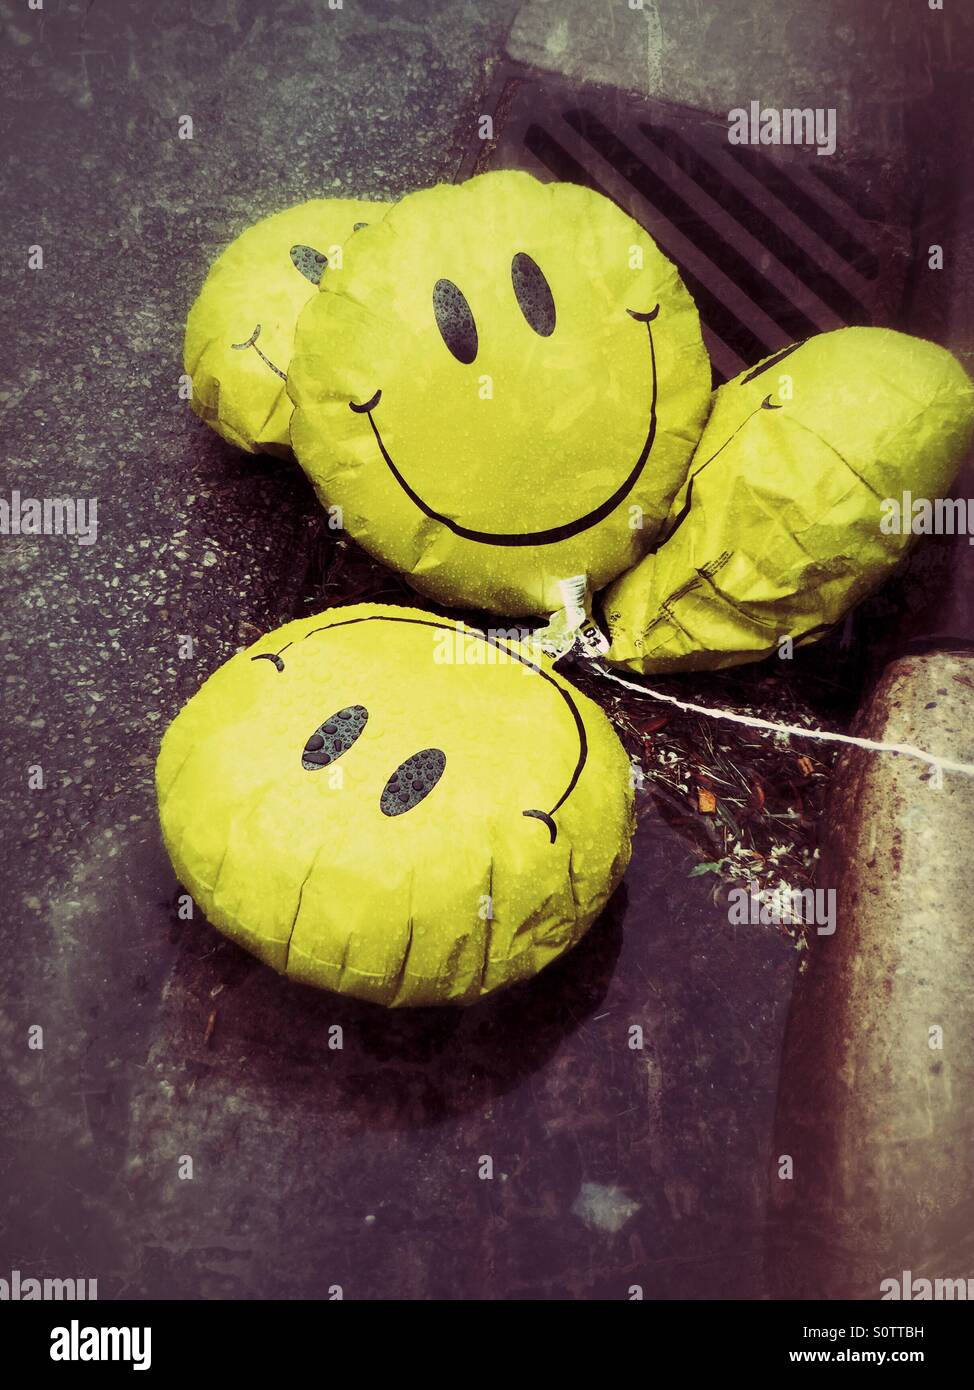 Sad, deflated happy face balloons laying in a puddle on the side of the  street Stock Photo - Alamy